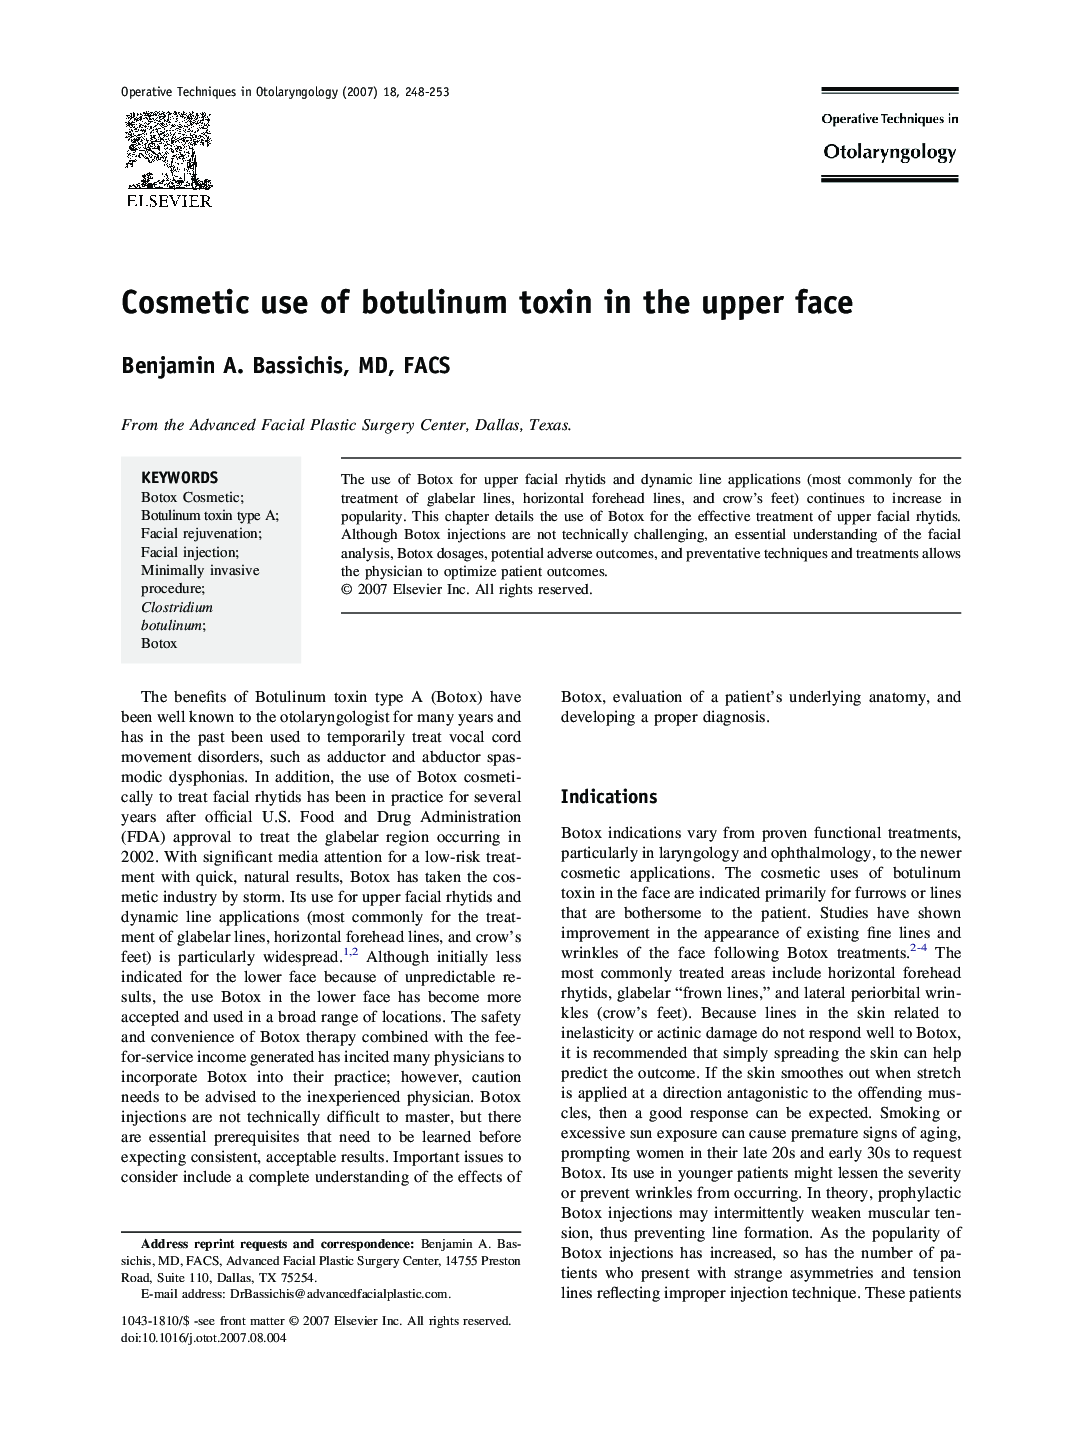 Cosmetic use of botulinum toxin in the upper face